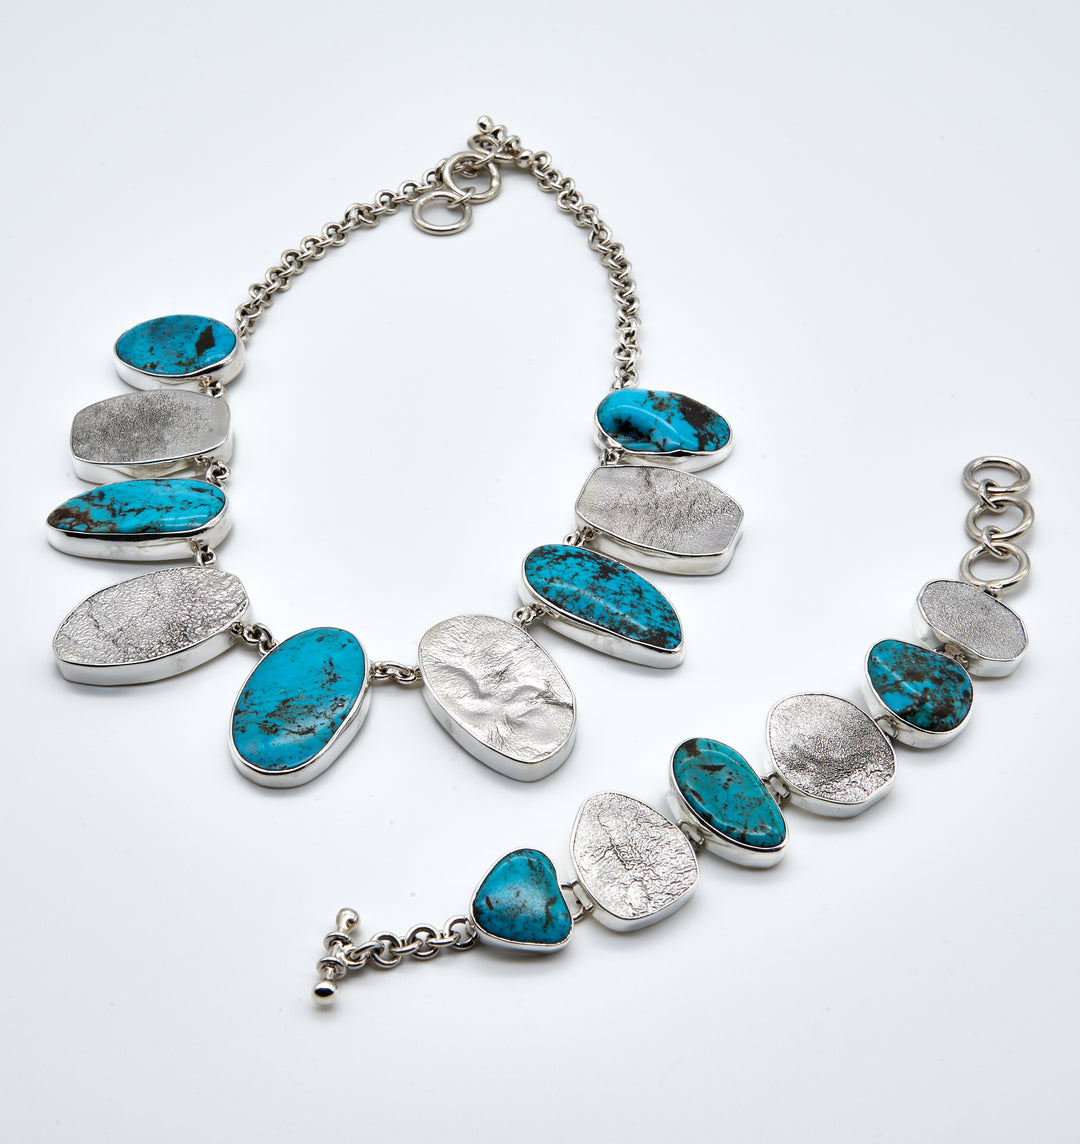 Sonoran Turquoise Necklace with Textured Silver and Bracelet